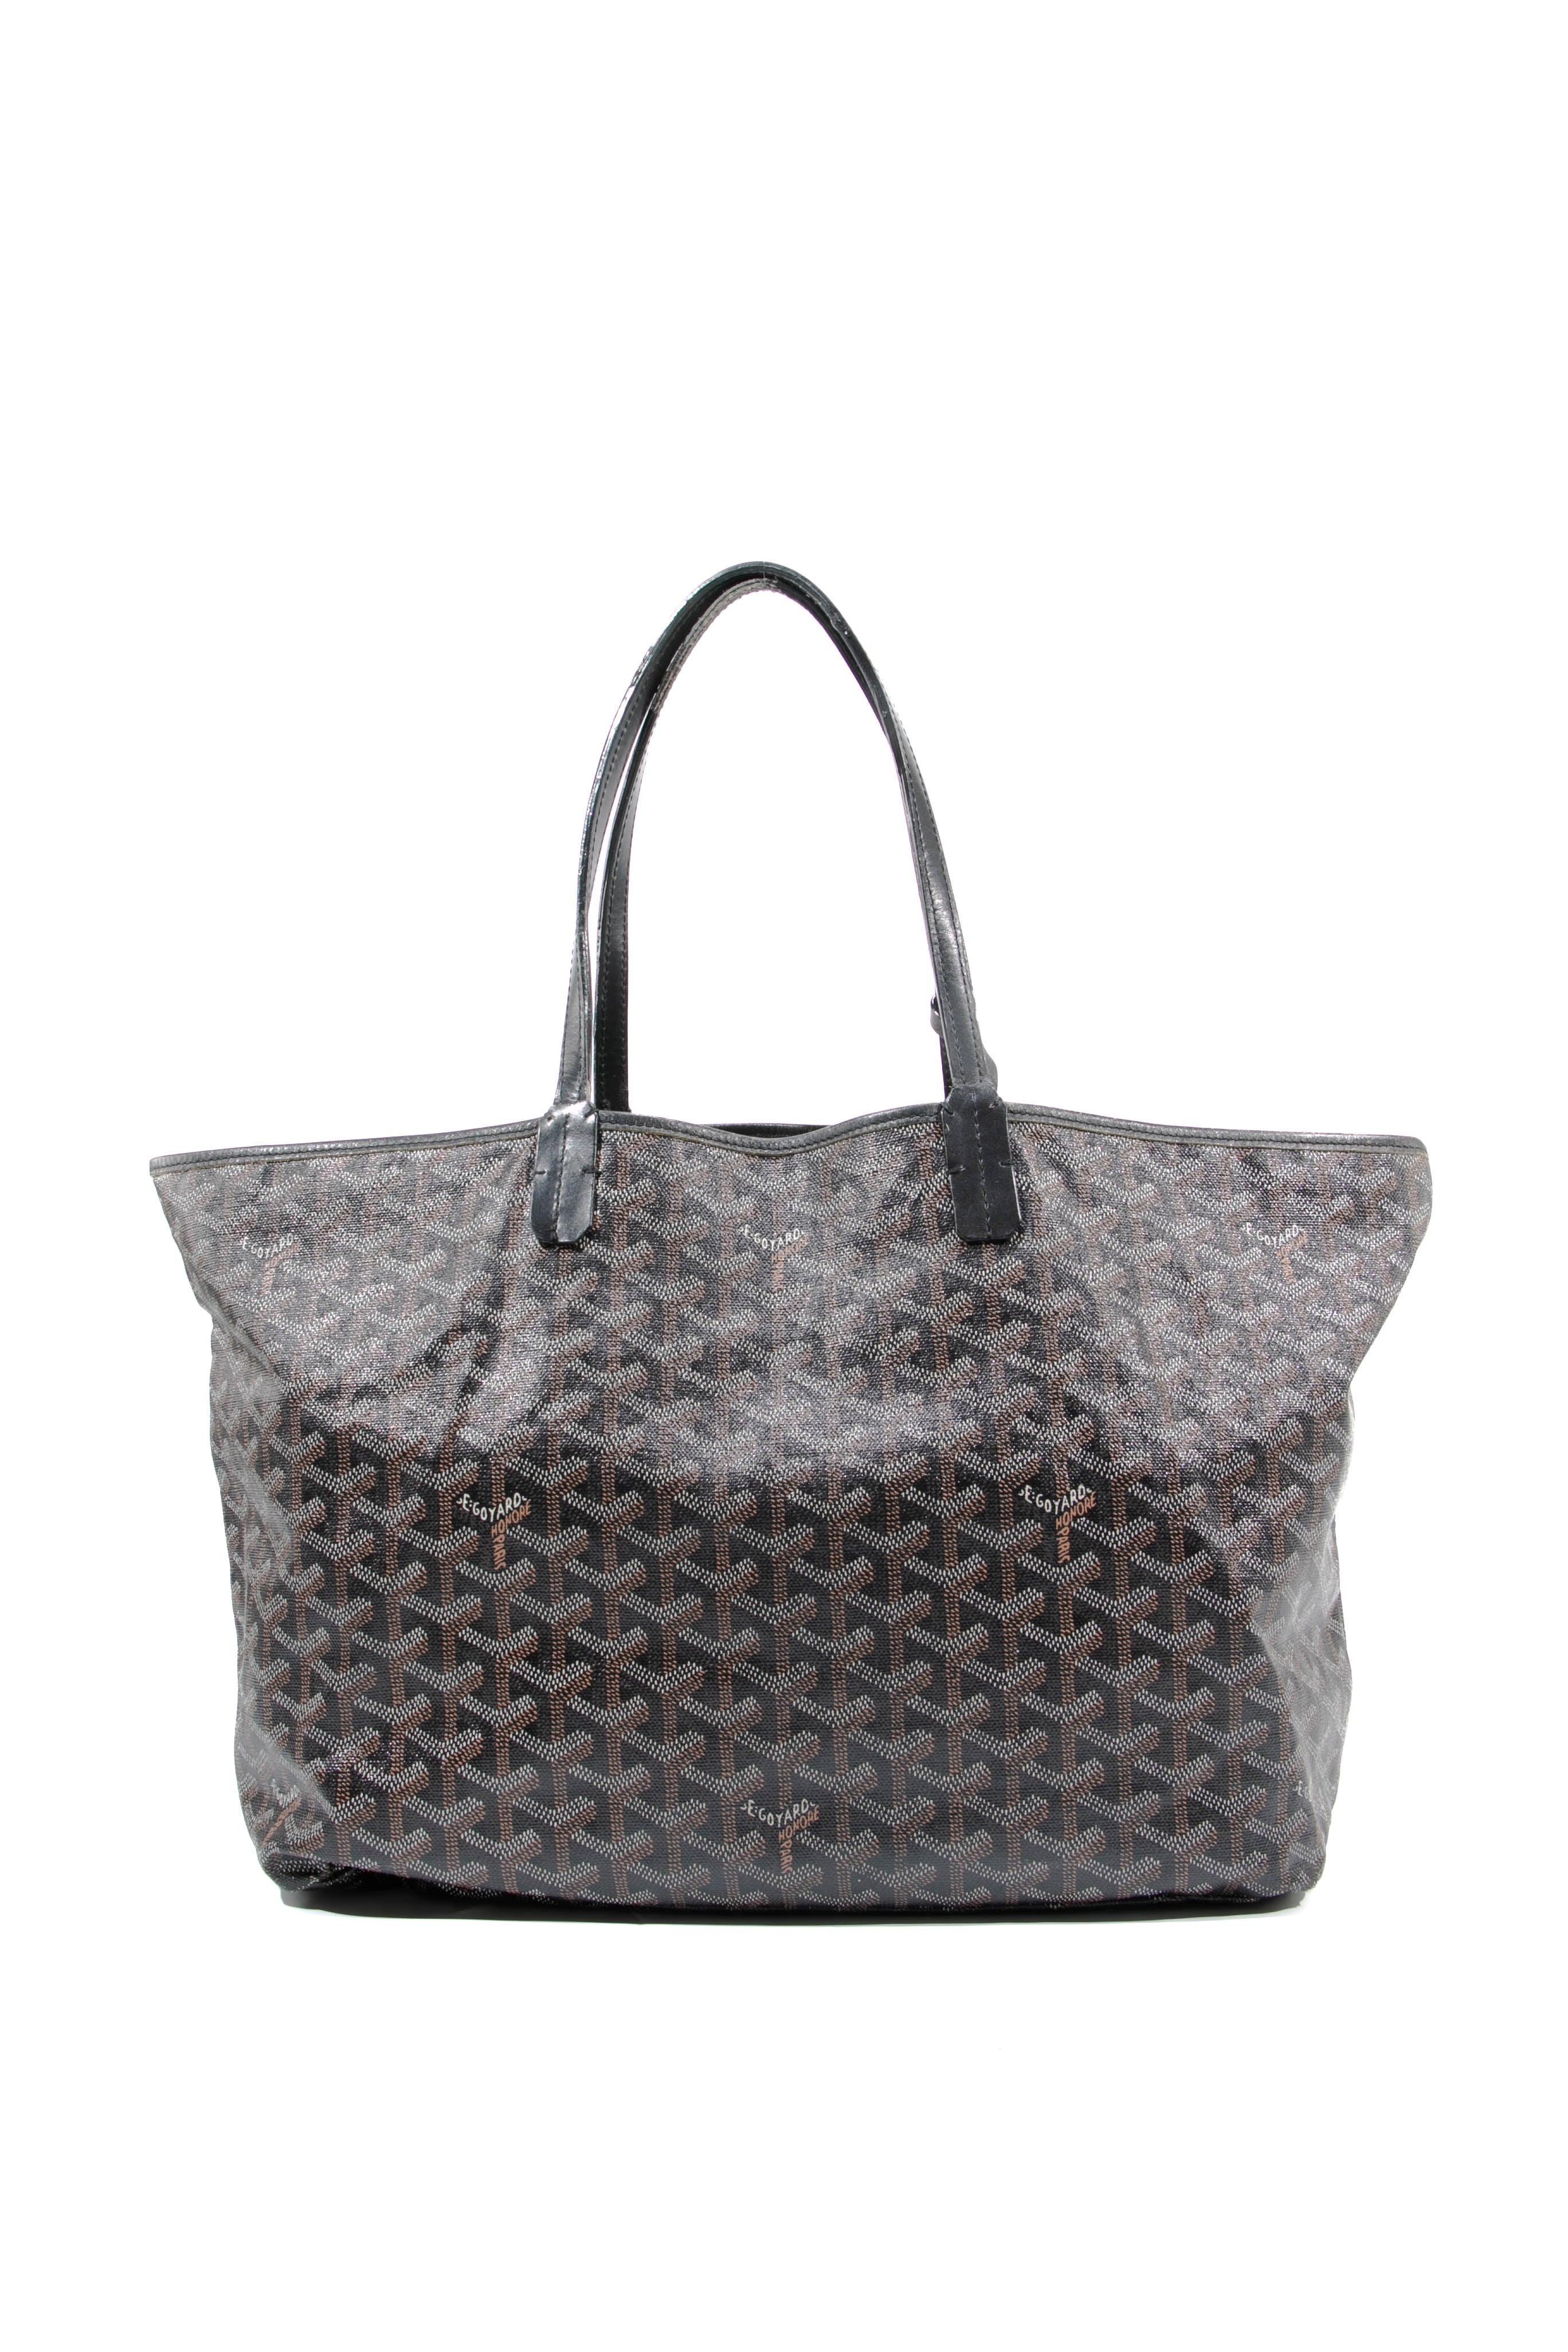 Discover The 8 Top Goyard Bags of 2021 | WP Diamonds